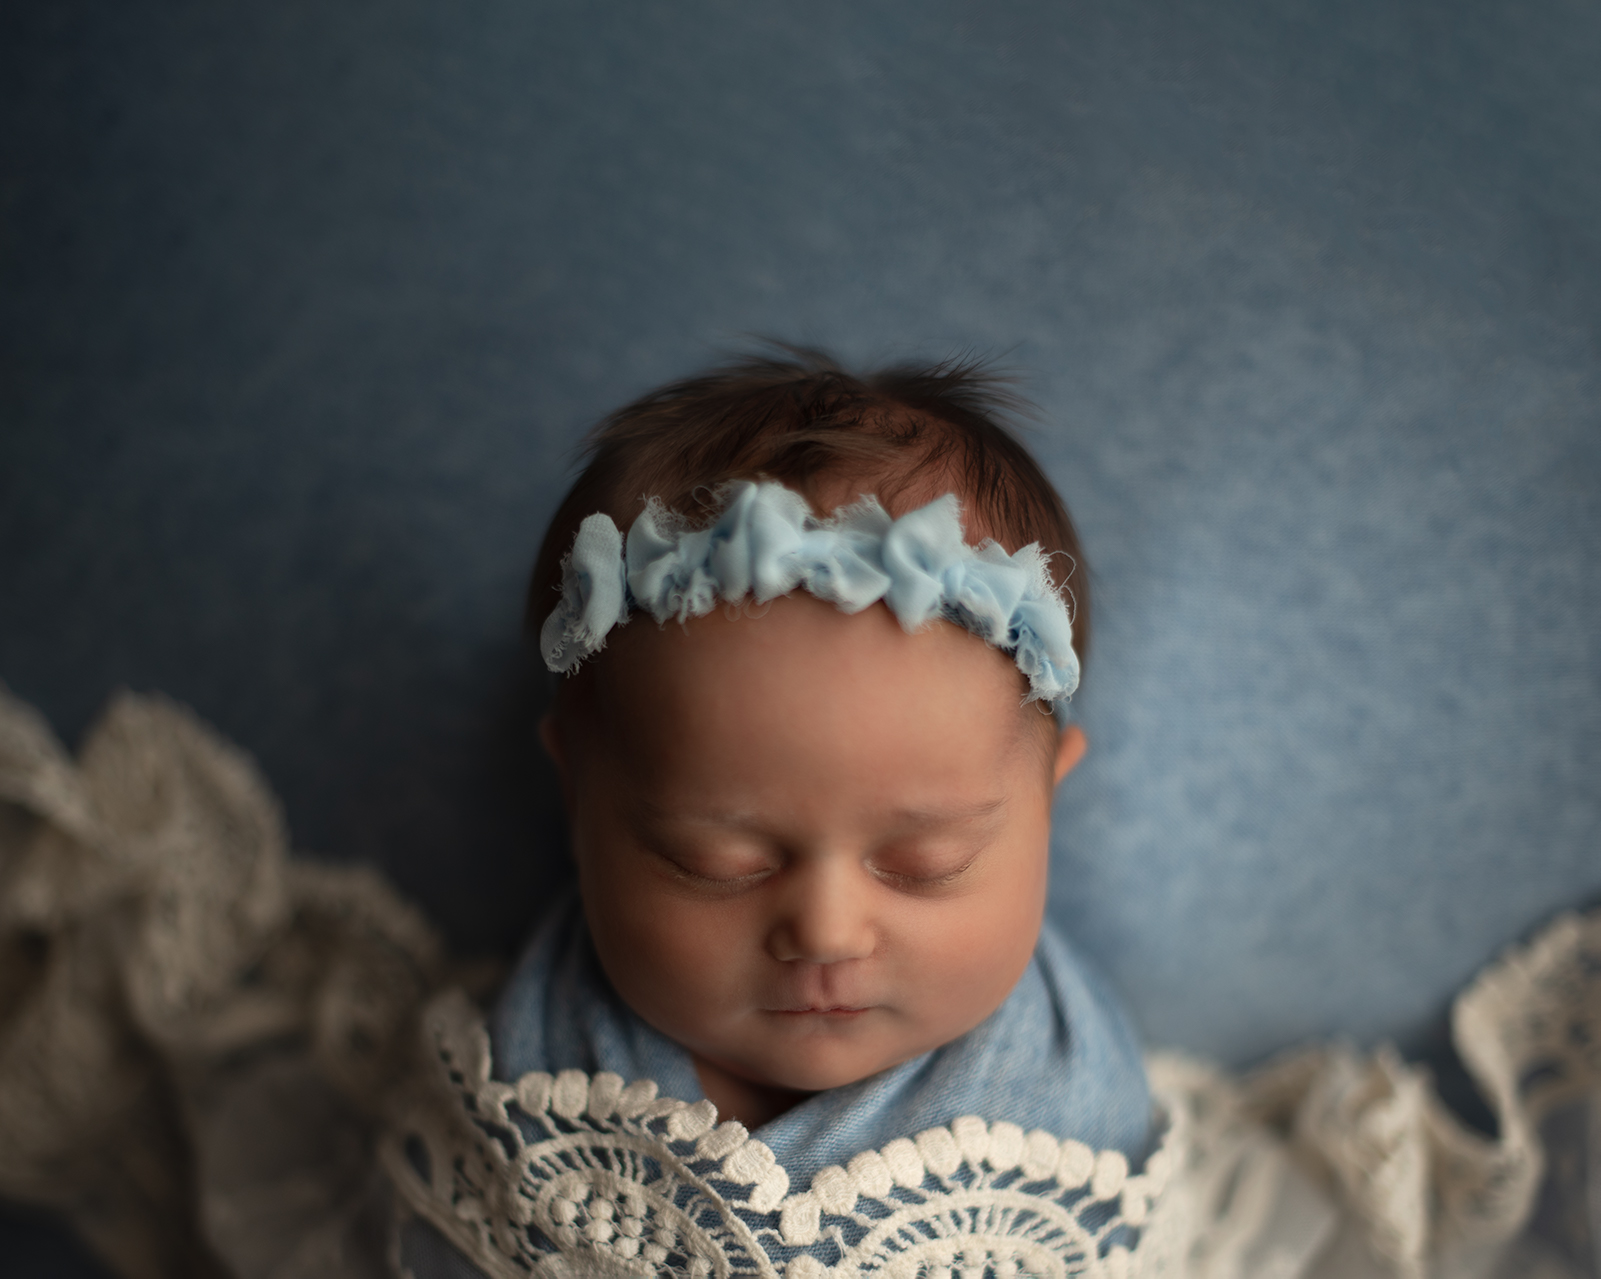 A newborn baby sleeps in a blue and lace swaddle wearing a blue headband st louis babysitters